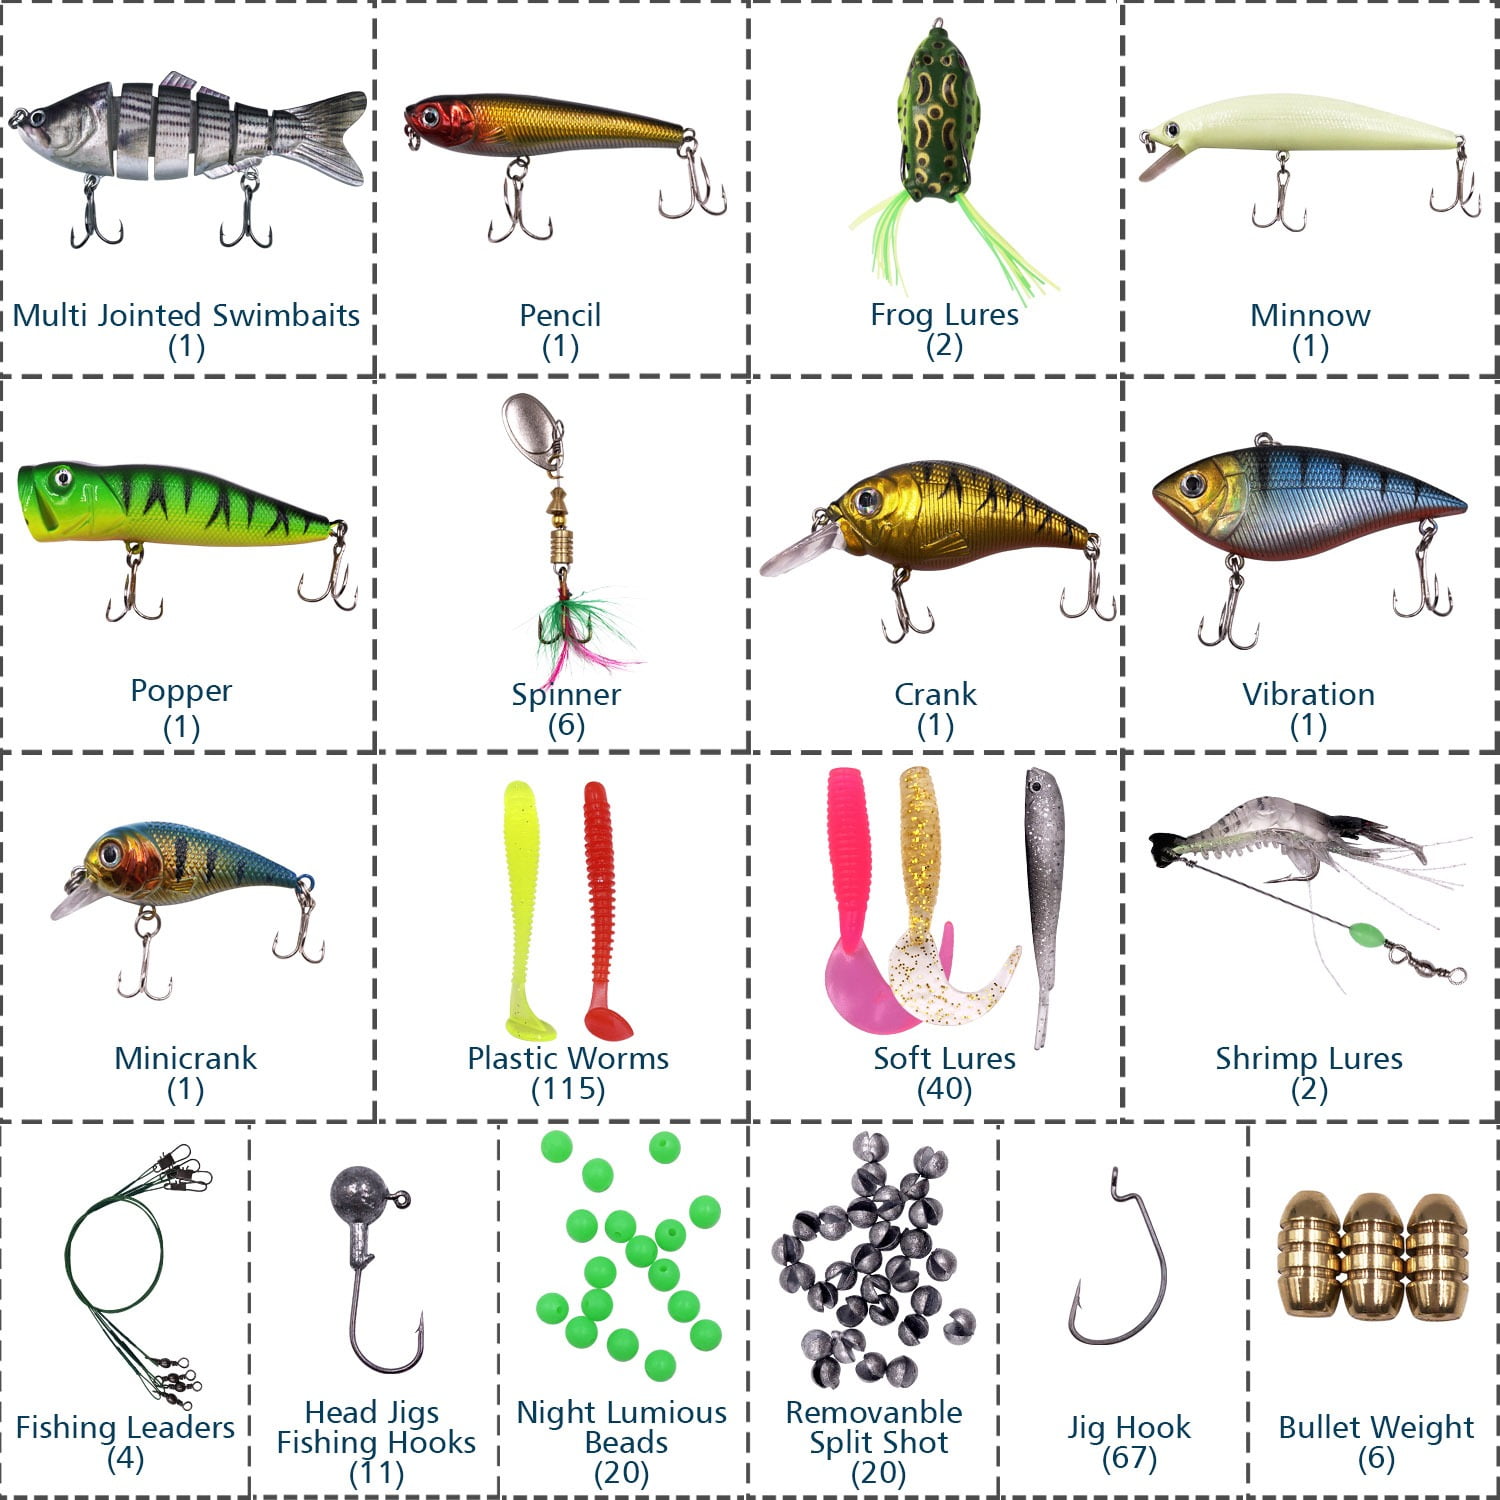 WDG 300Pcs Fishing Lures Kit for Bass, Freshwater Frog Lure with Free Tackle  Box, Fishing Lure Set Including Combo Swimbaits, Crankbaits, Spinnerbaits,  Plastic Worms, Jigs, Topwater Lures 